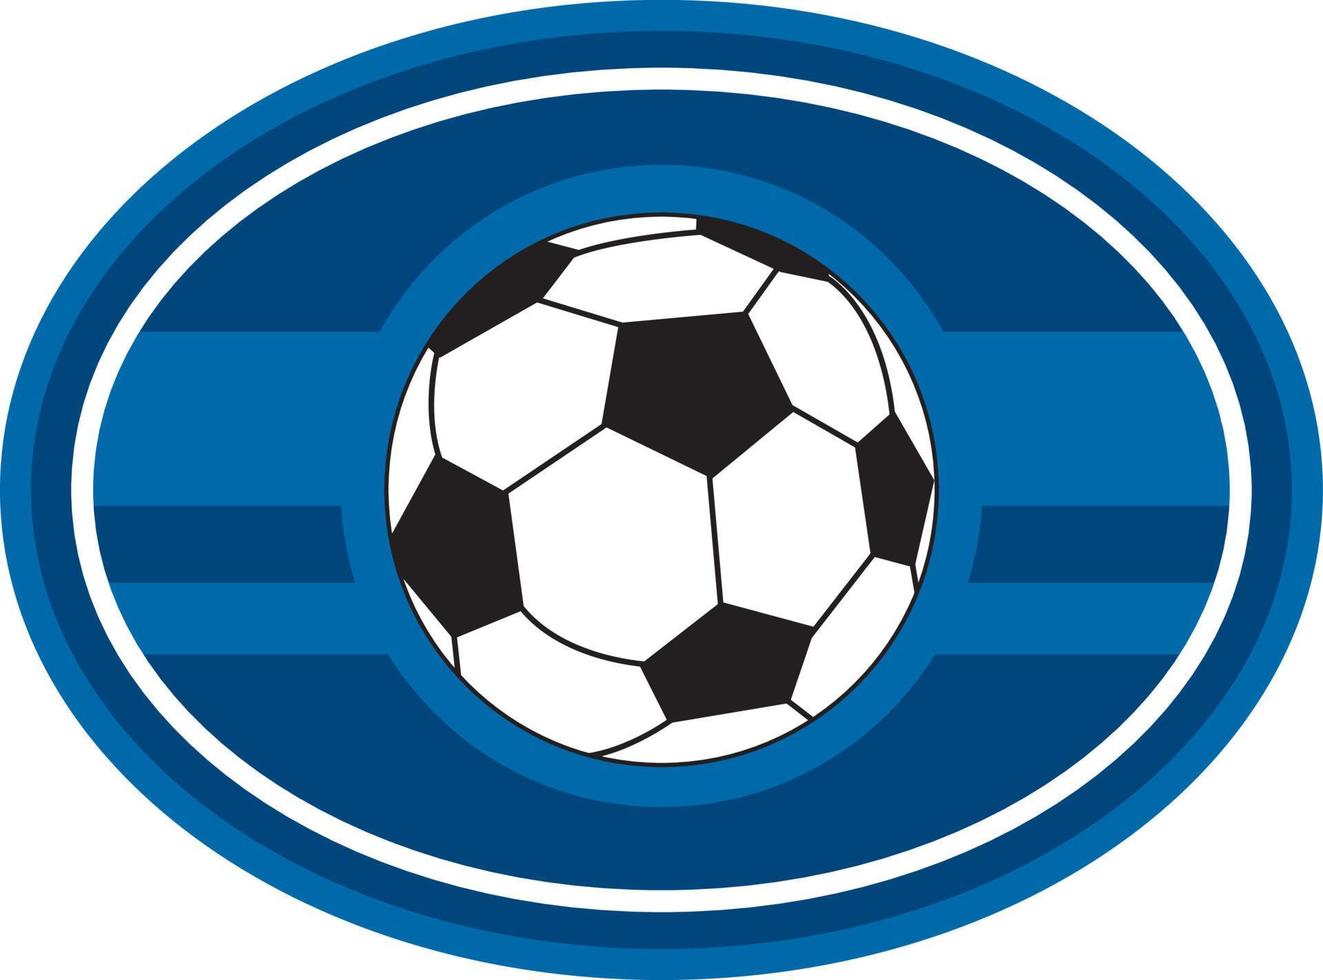 Oval Soccer Football Badge with Ball - Sports Illustration vector